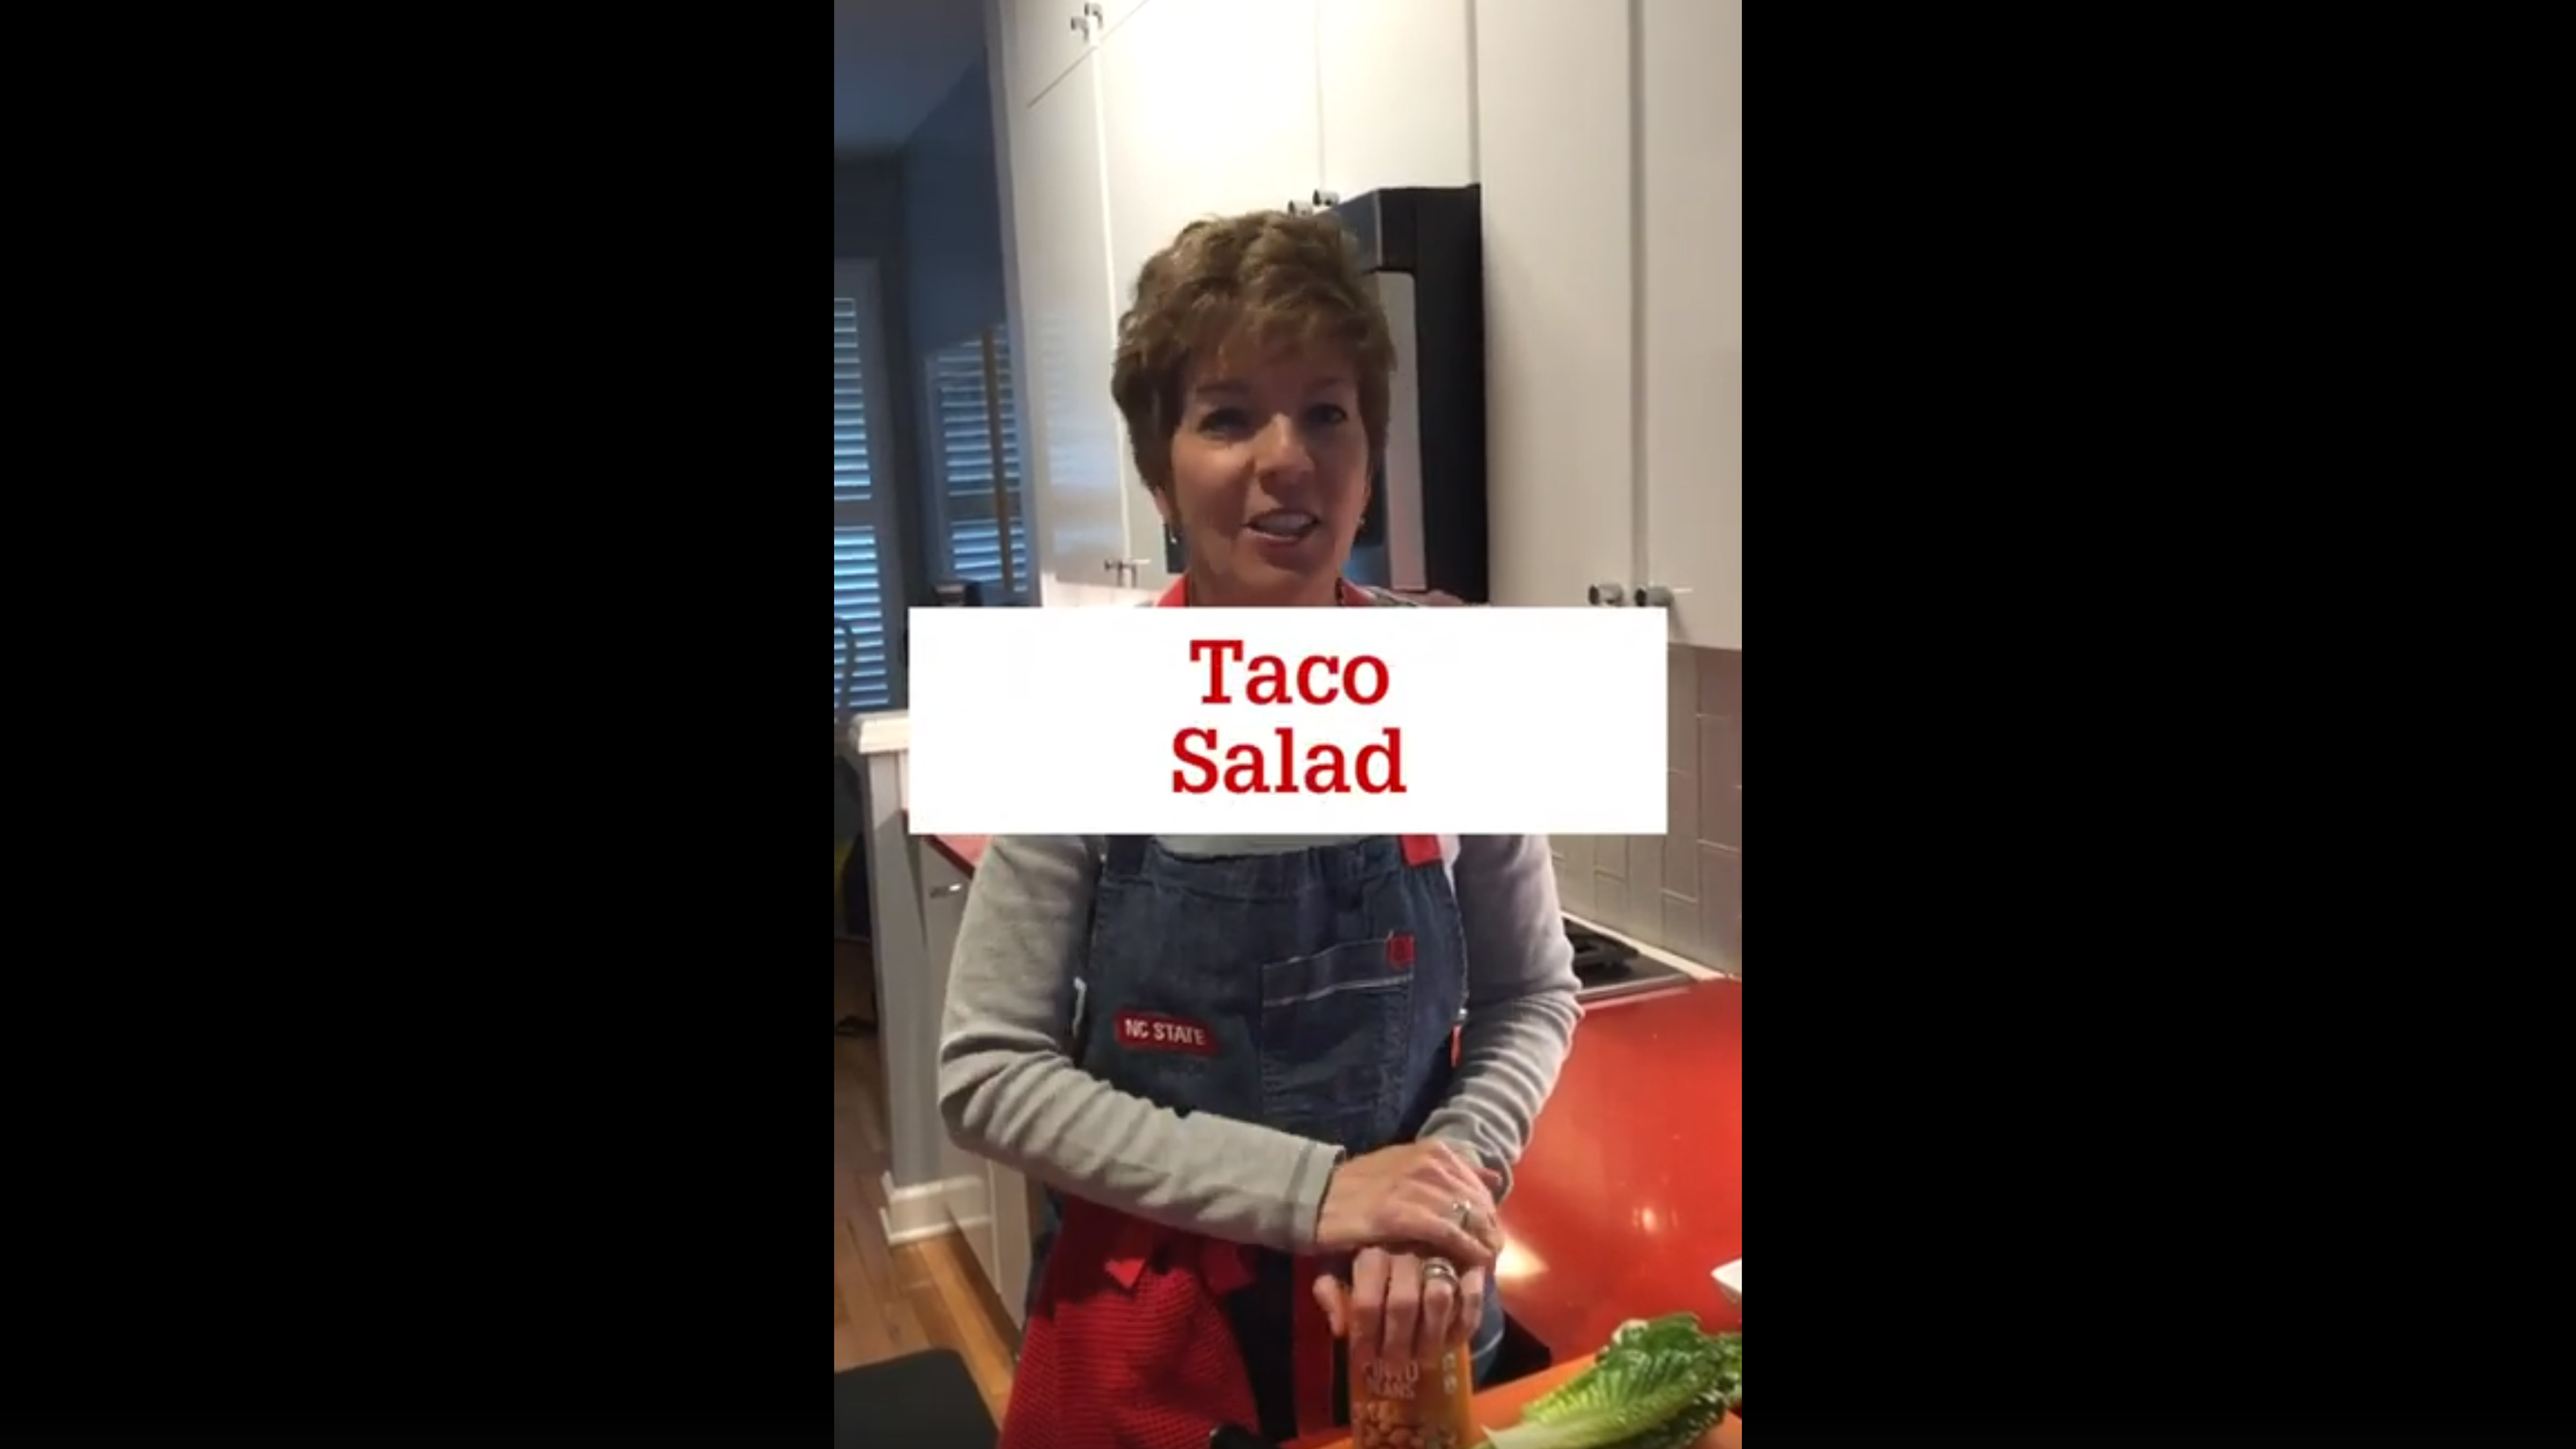 A woman wearing an apron is smiling while standing at her kitchen counter with ingredients for a taco salad laid out. The words "Taco Salad" are displayed across the image.